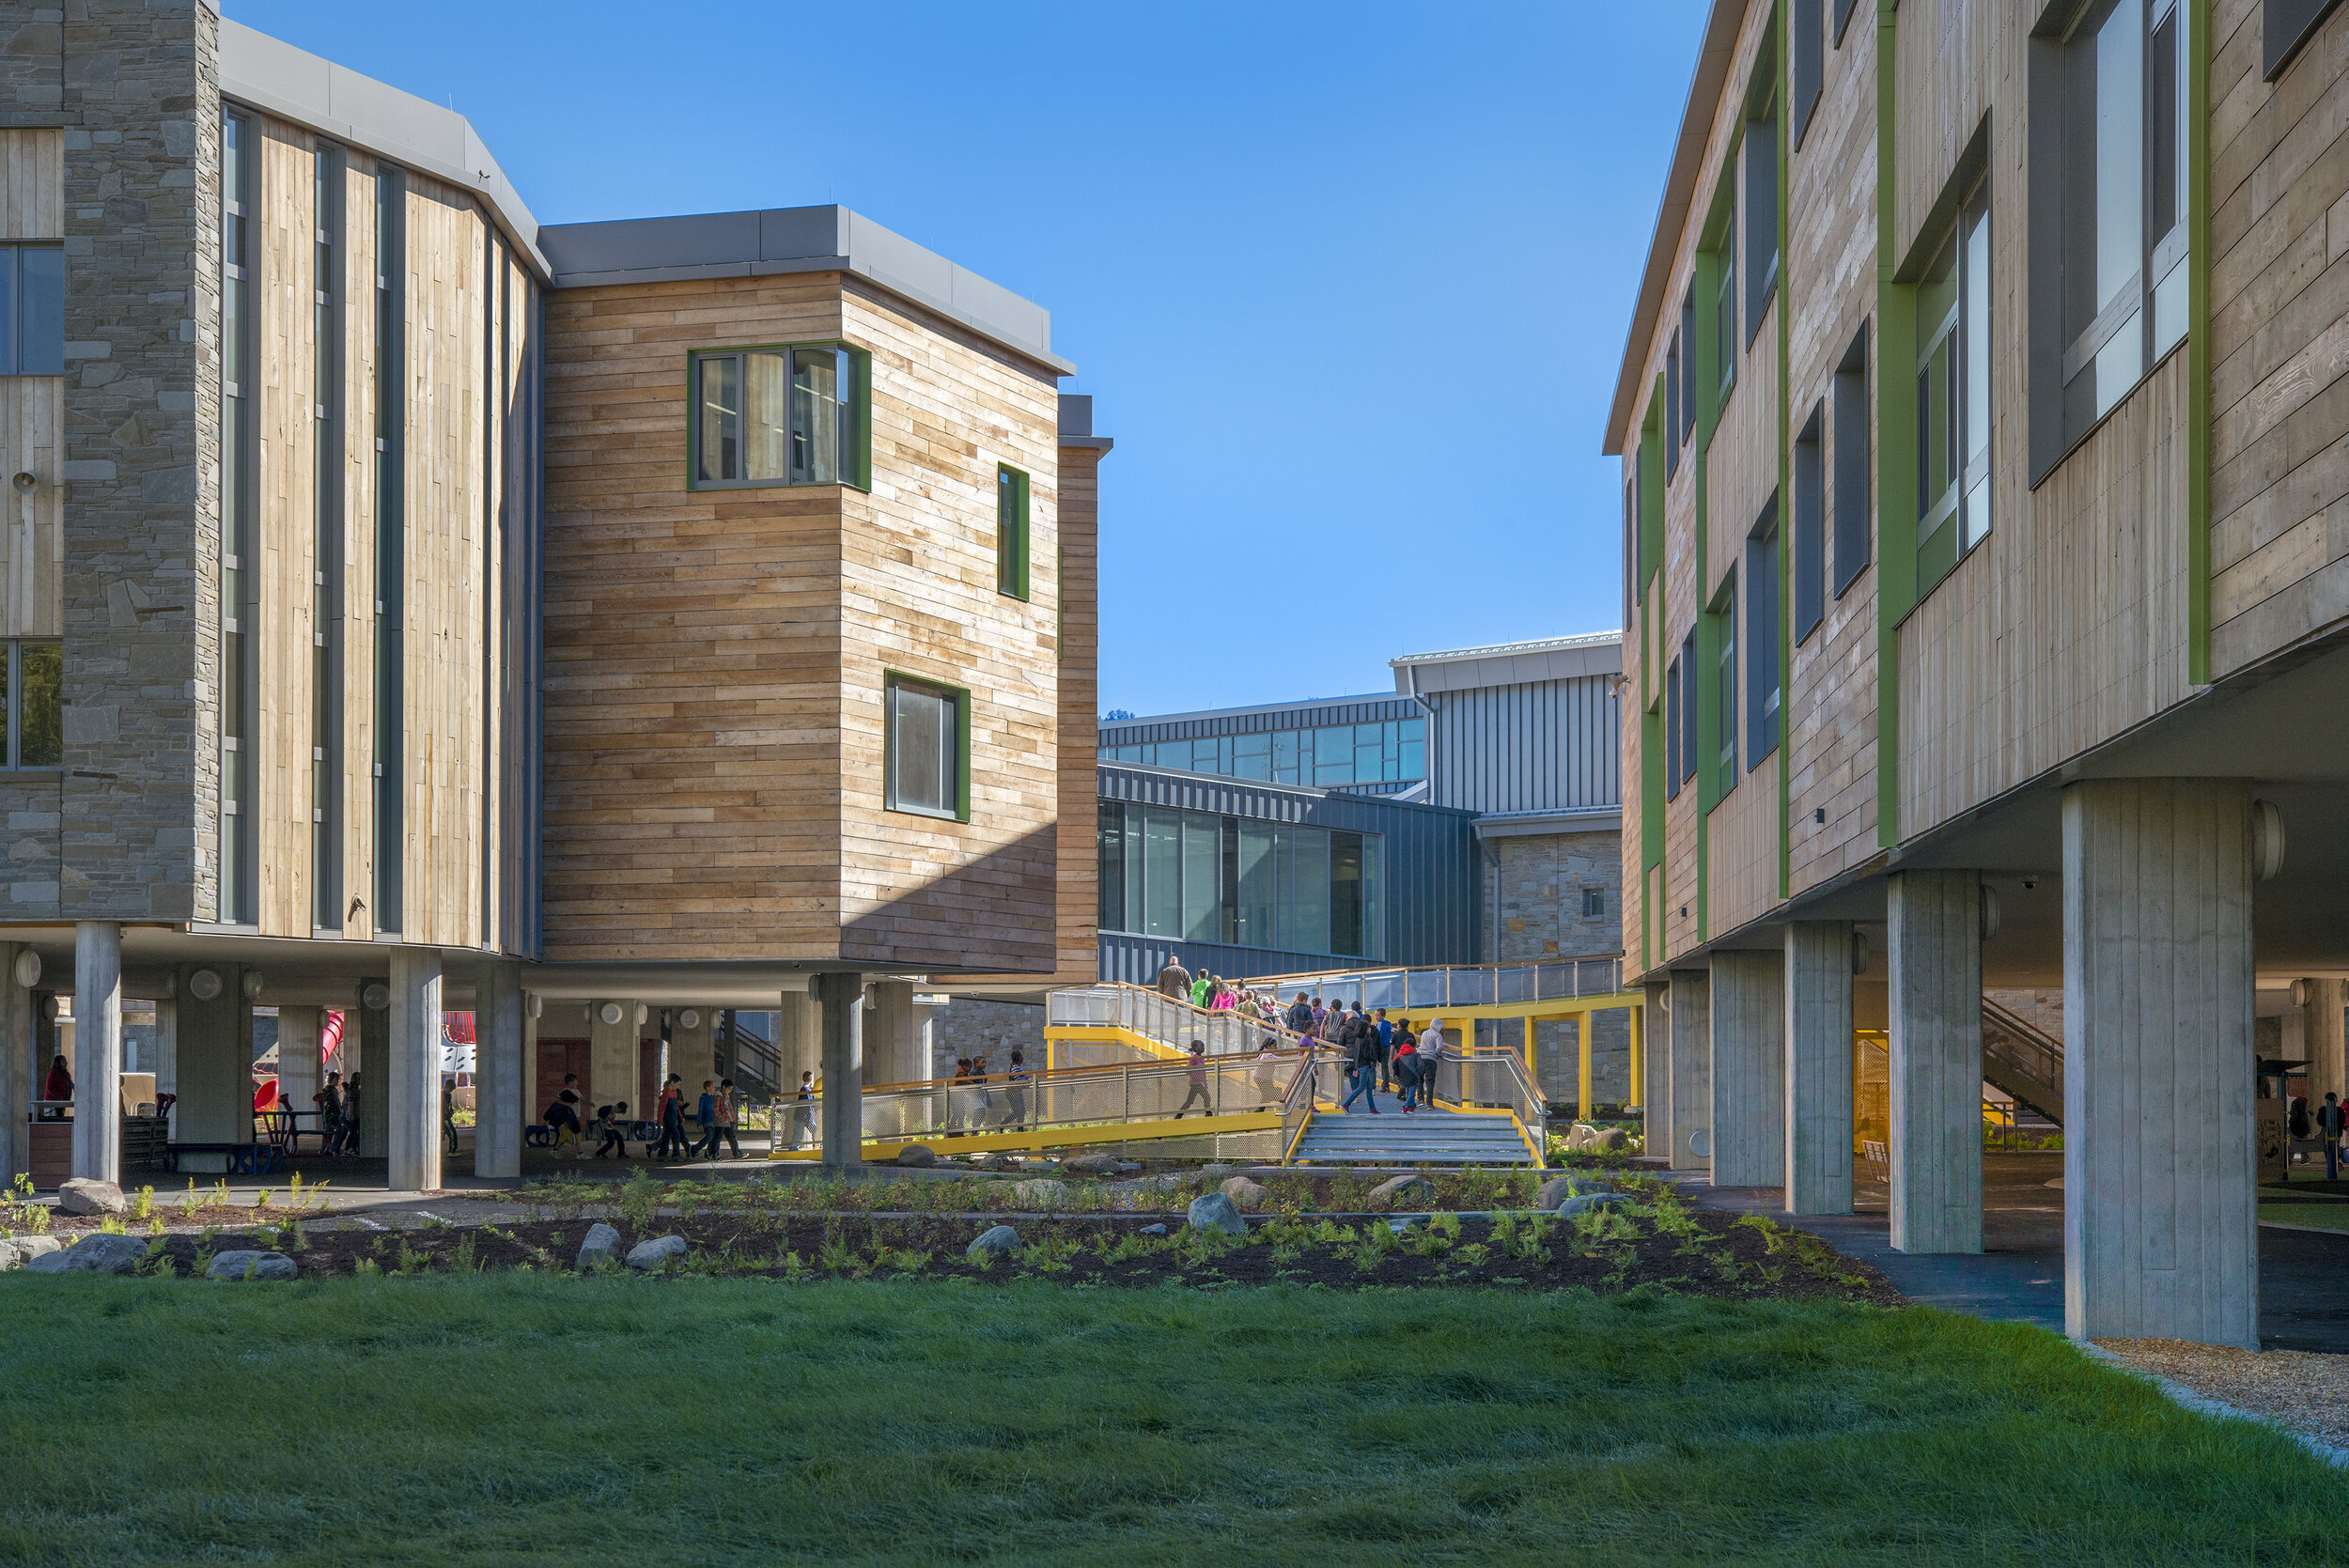 MACARTHUR ELEMENTARY SCHOOL&lt;strong&gt;Redefine the urban elementary school and restore the surrounding neighborhood while creating a deeply sustainable project.&lt;/strong&gt;